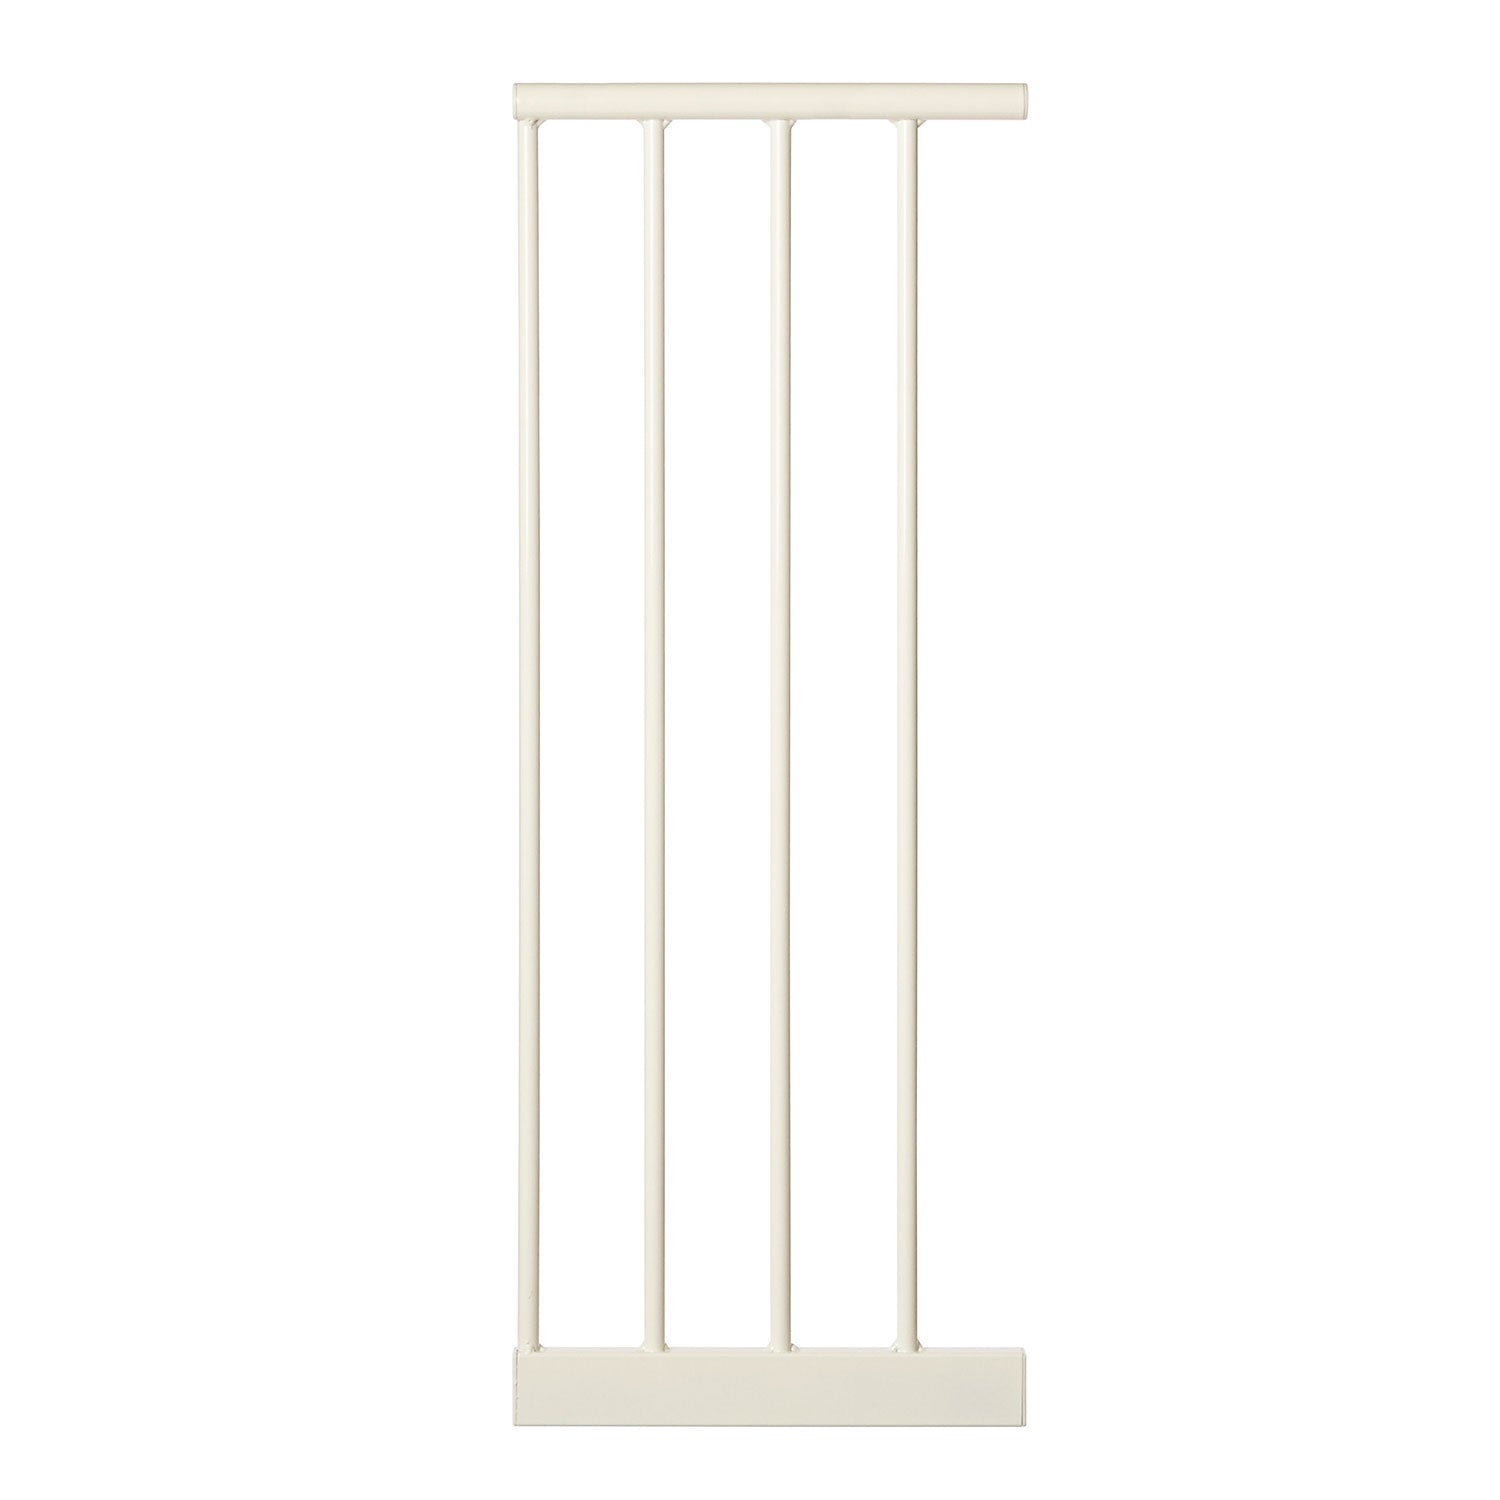 North States Ns4995 10.5 Inch Extension For Easy-close Gate